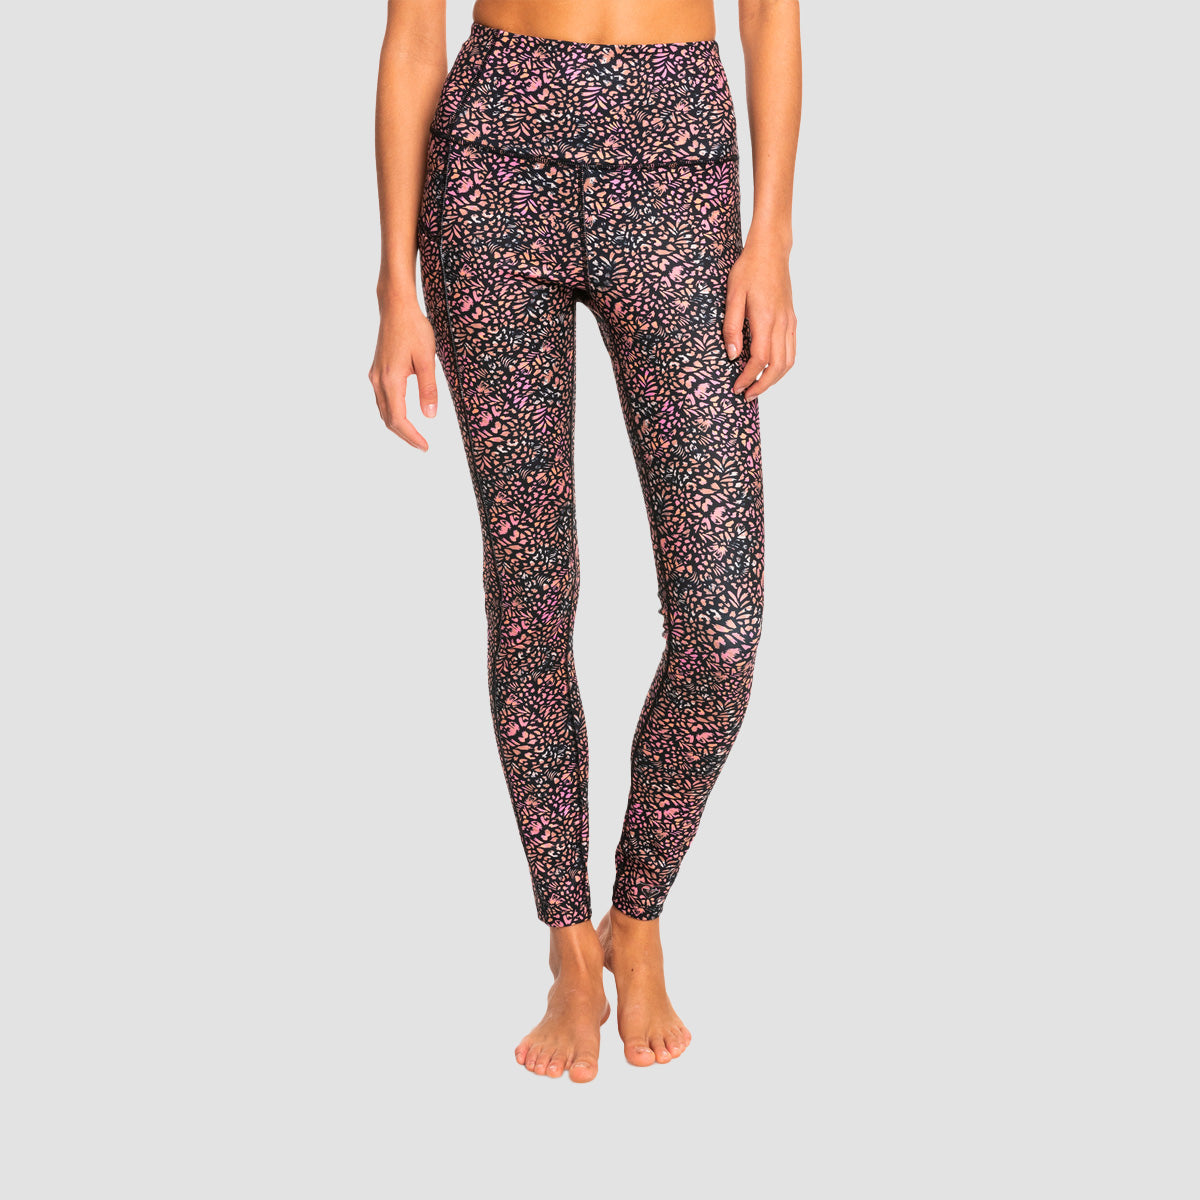 Roxy Heart Into It Ankle Sports Leggings Antracite Animal Dust - Womens